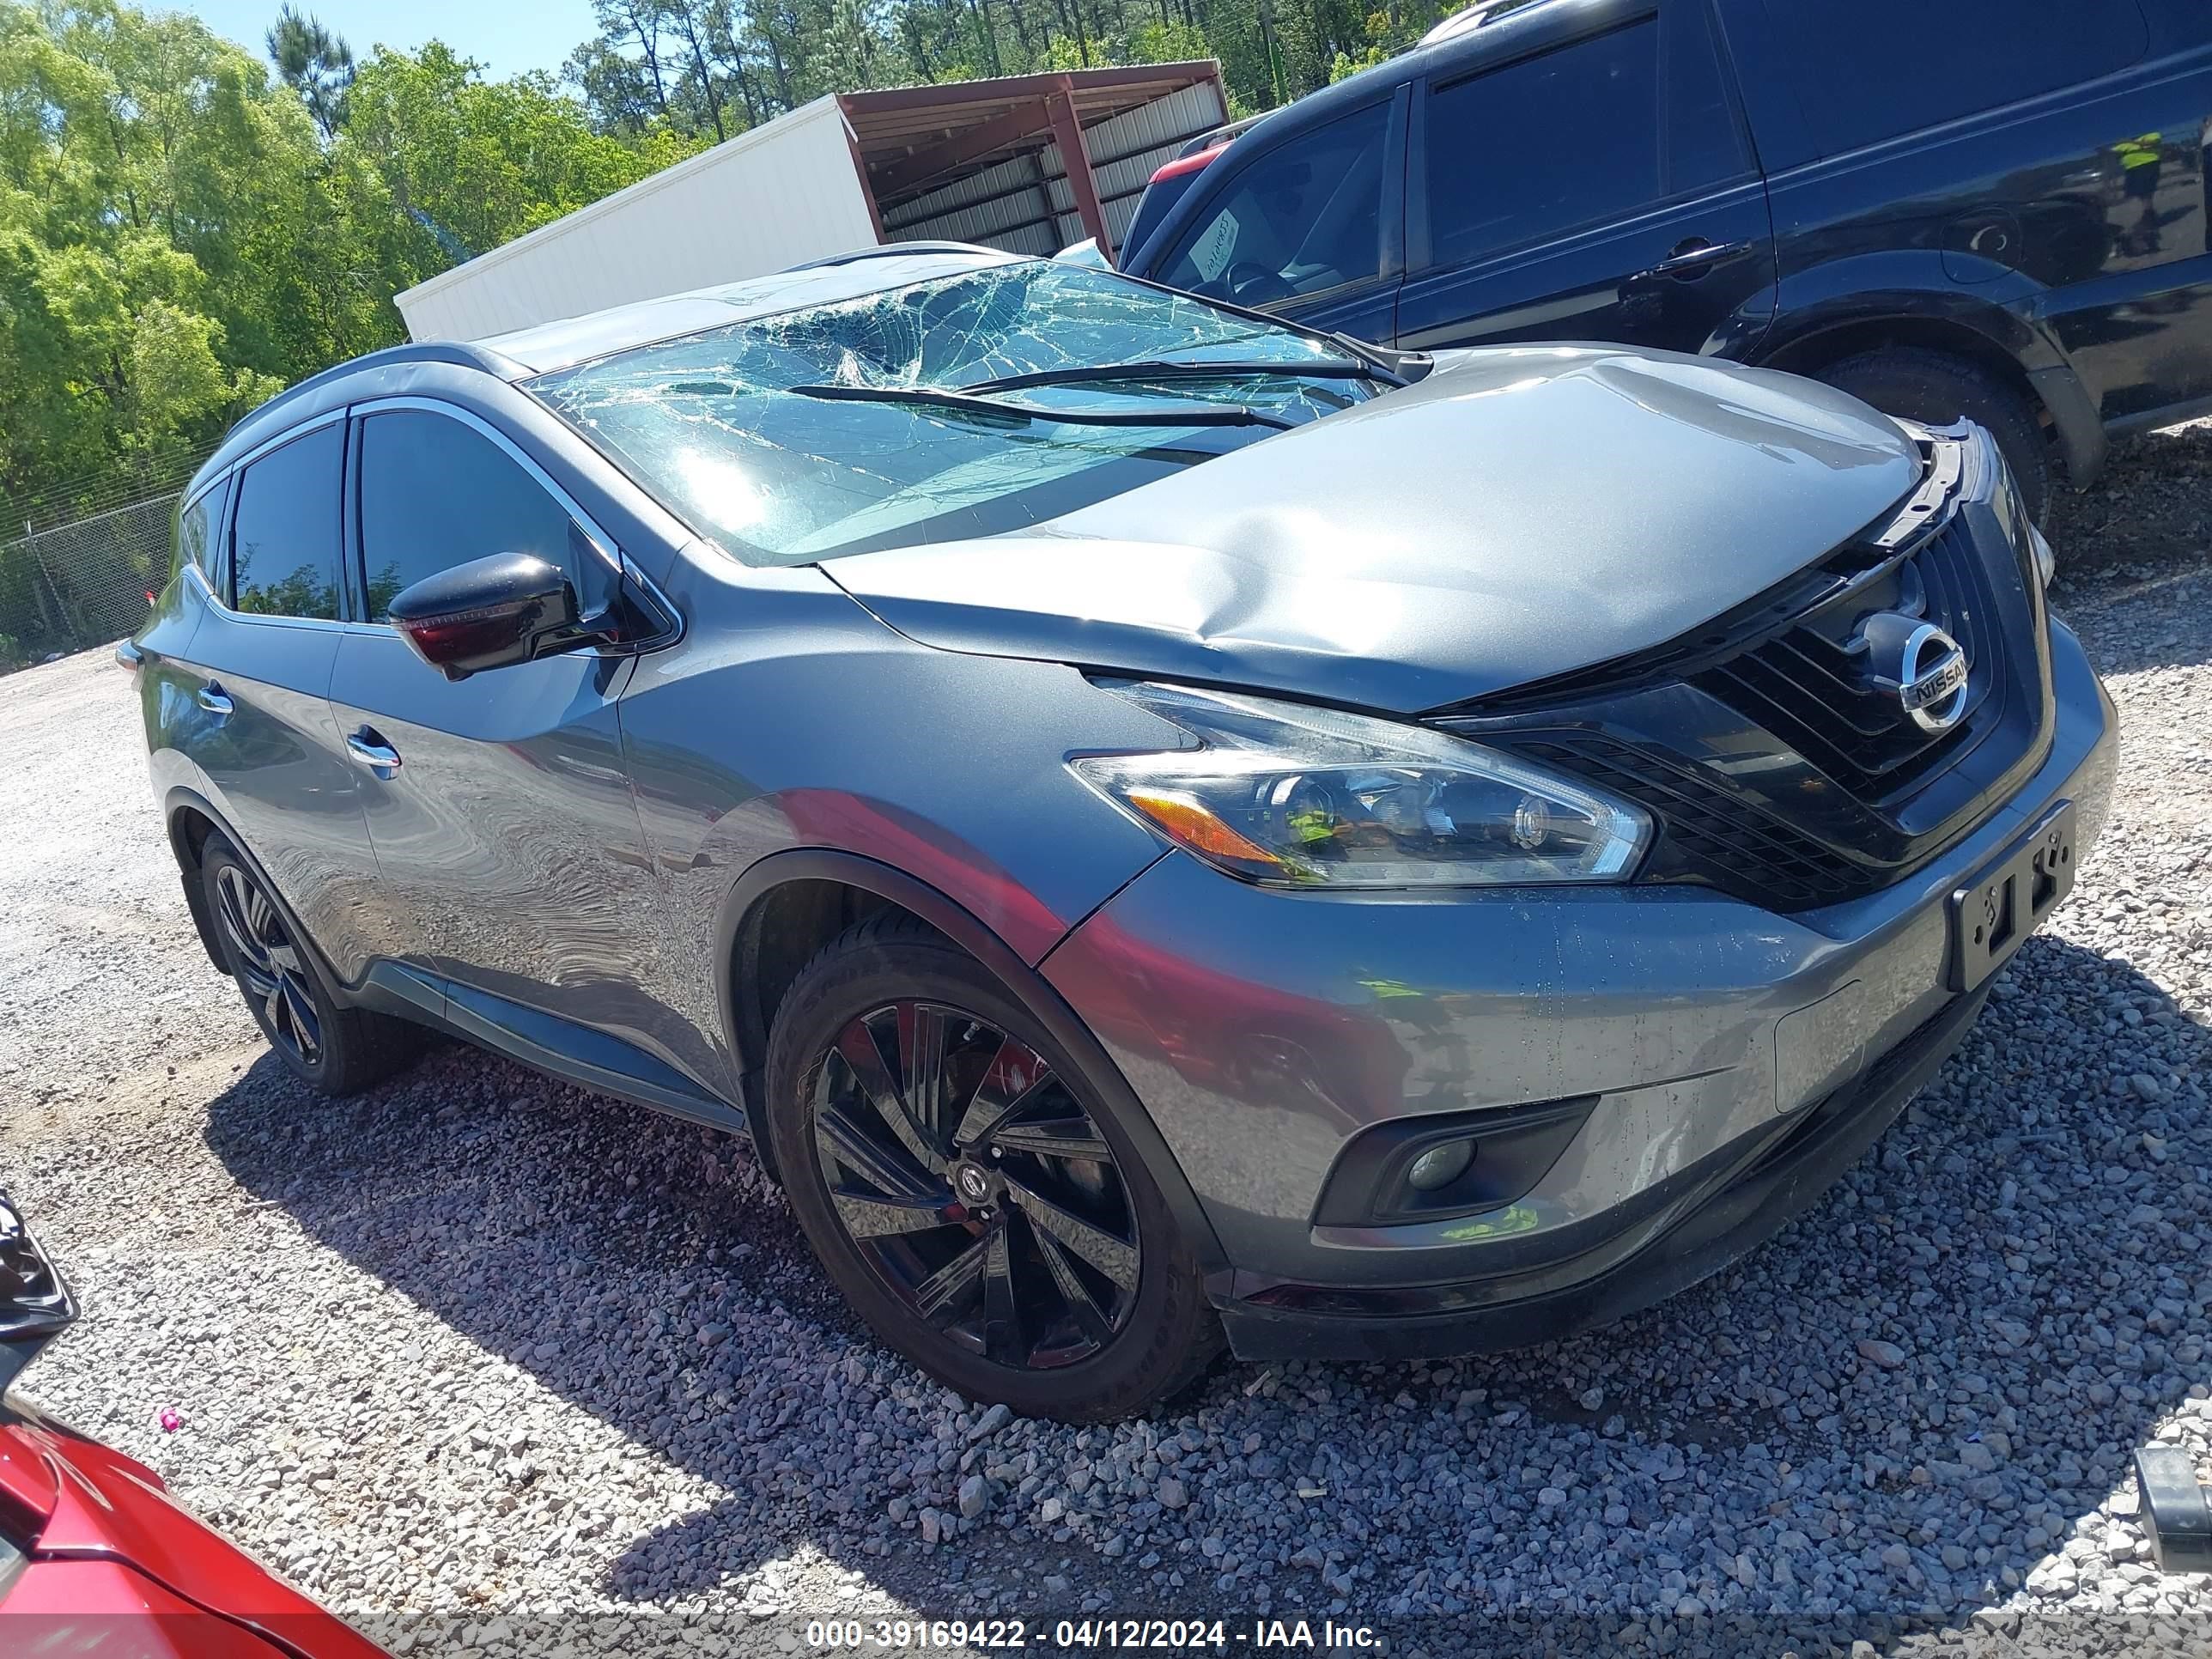 vin: 5N1AZ2MG3JN121103 5N1AZ2MG3JN121103 2018 nissan murano 3500 for Sale in 39562, 8209 Old Stage Rd, Moss Point, Mississippi, USA